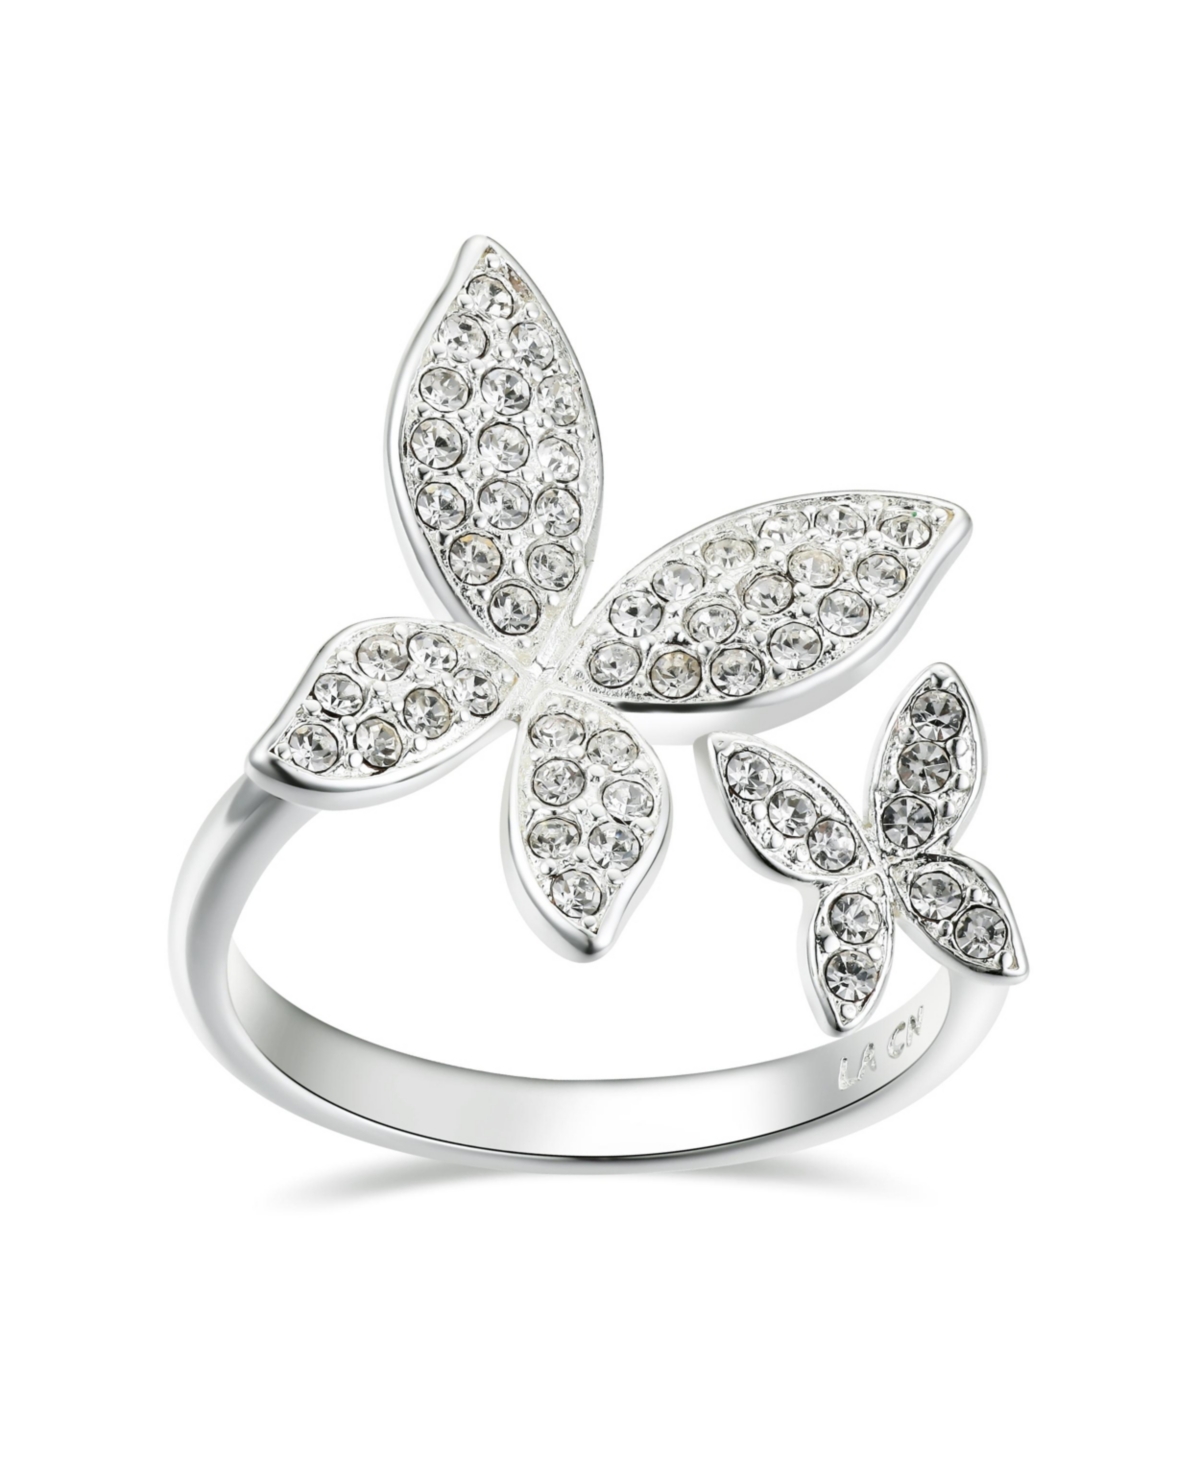 Seven Piece White Crystal Butterfly Ring Set - HoMafy